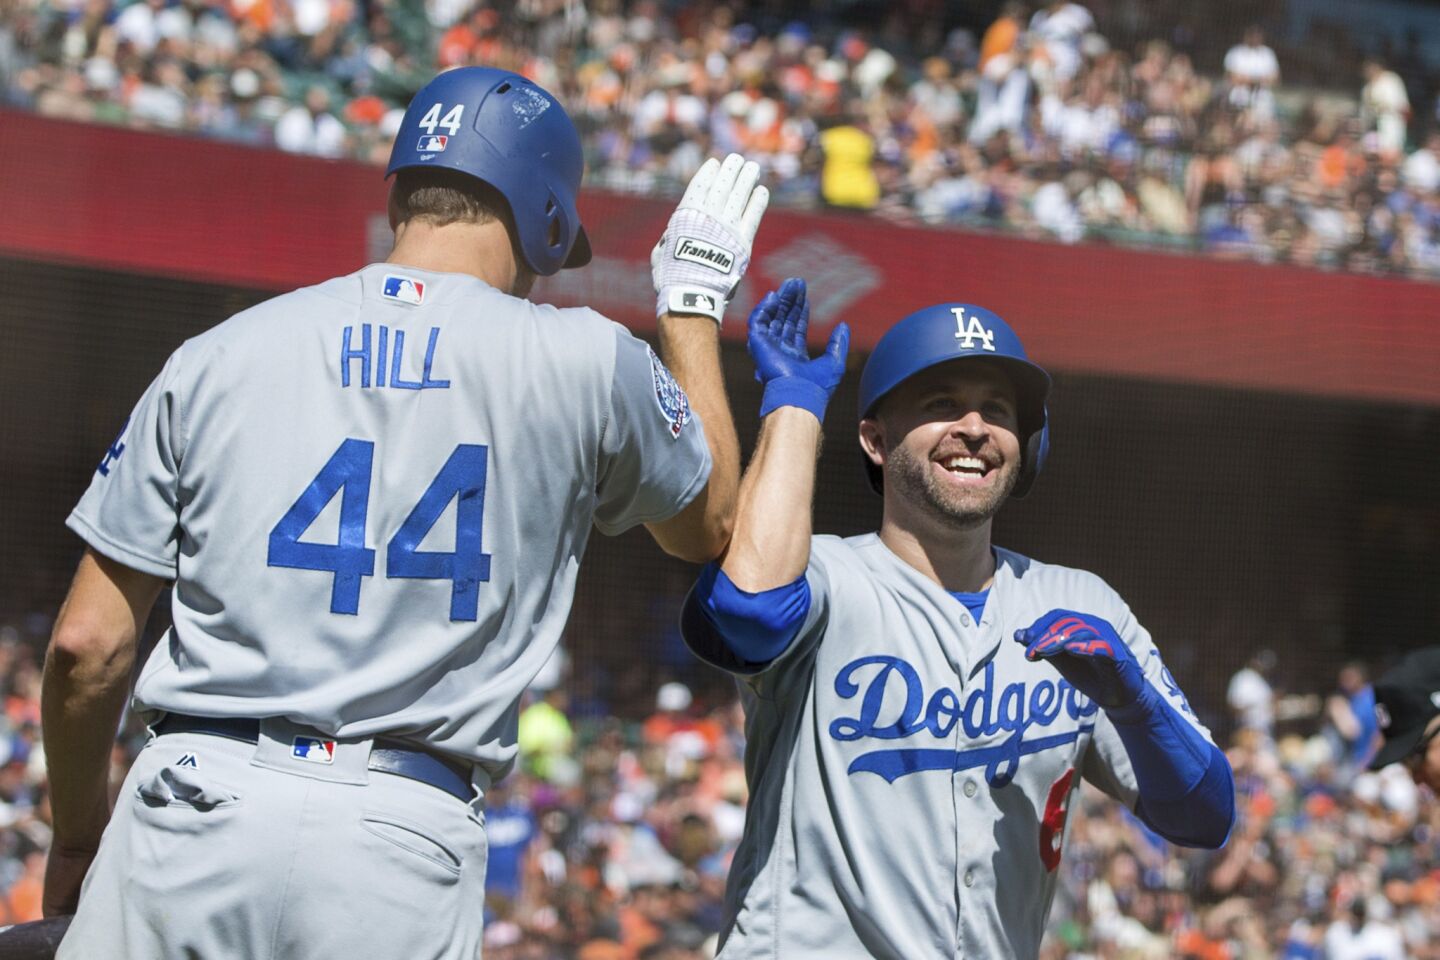 Los Angeles Dodgers Brian Dozier, right, celebrates with Rich Hill (44) after he hit a two-run homer against the San Francisco Giants in the third inning of a baseball game in San Francisco, Sunday, Sept. 30, 2018. (AP Photo/John Hefti)